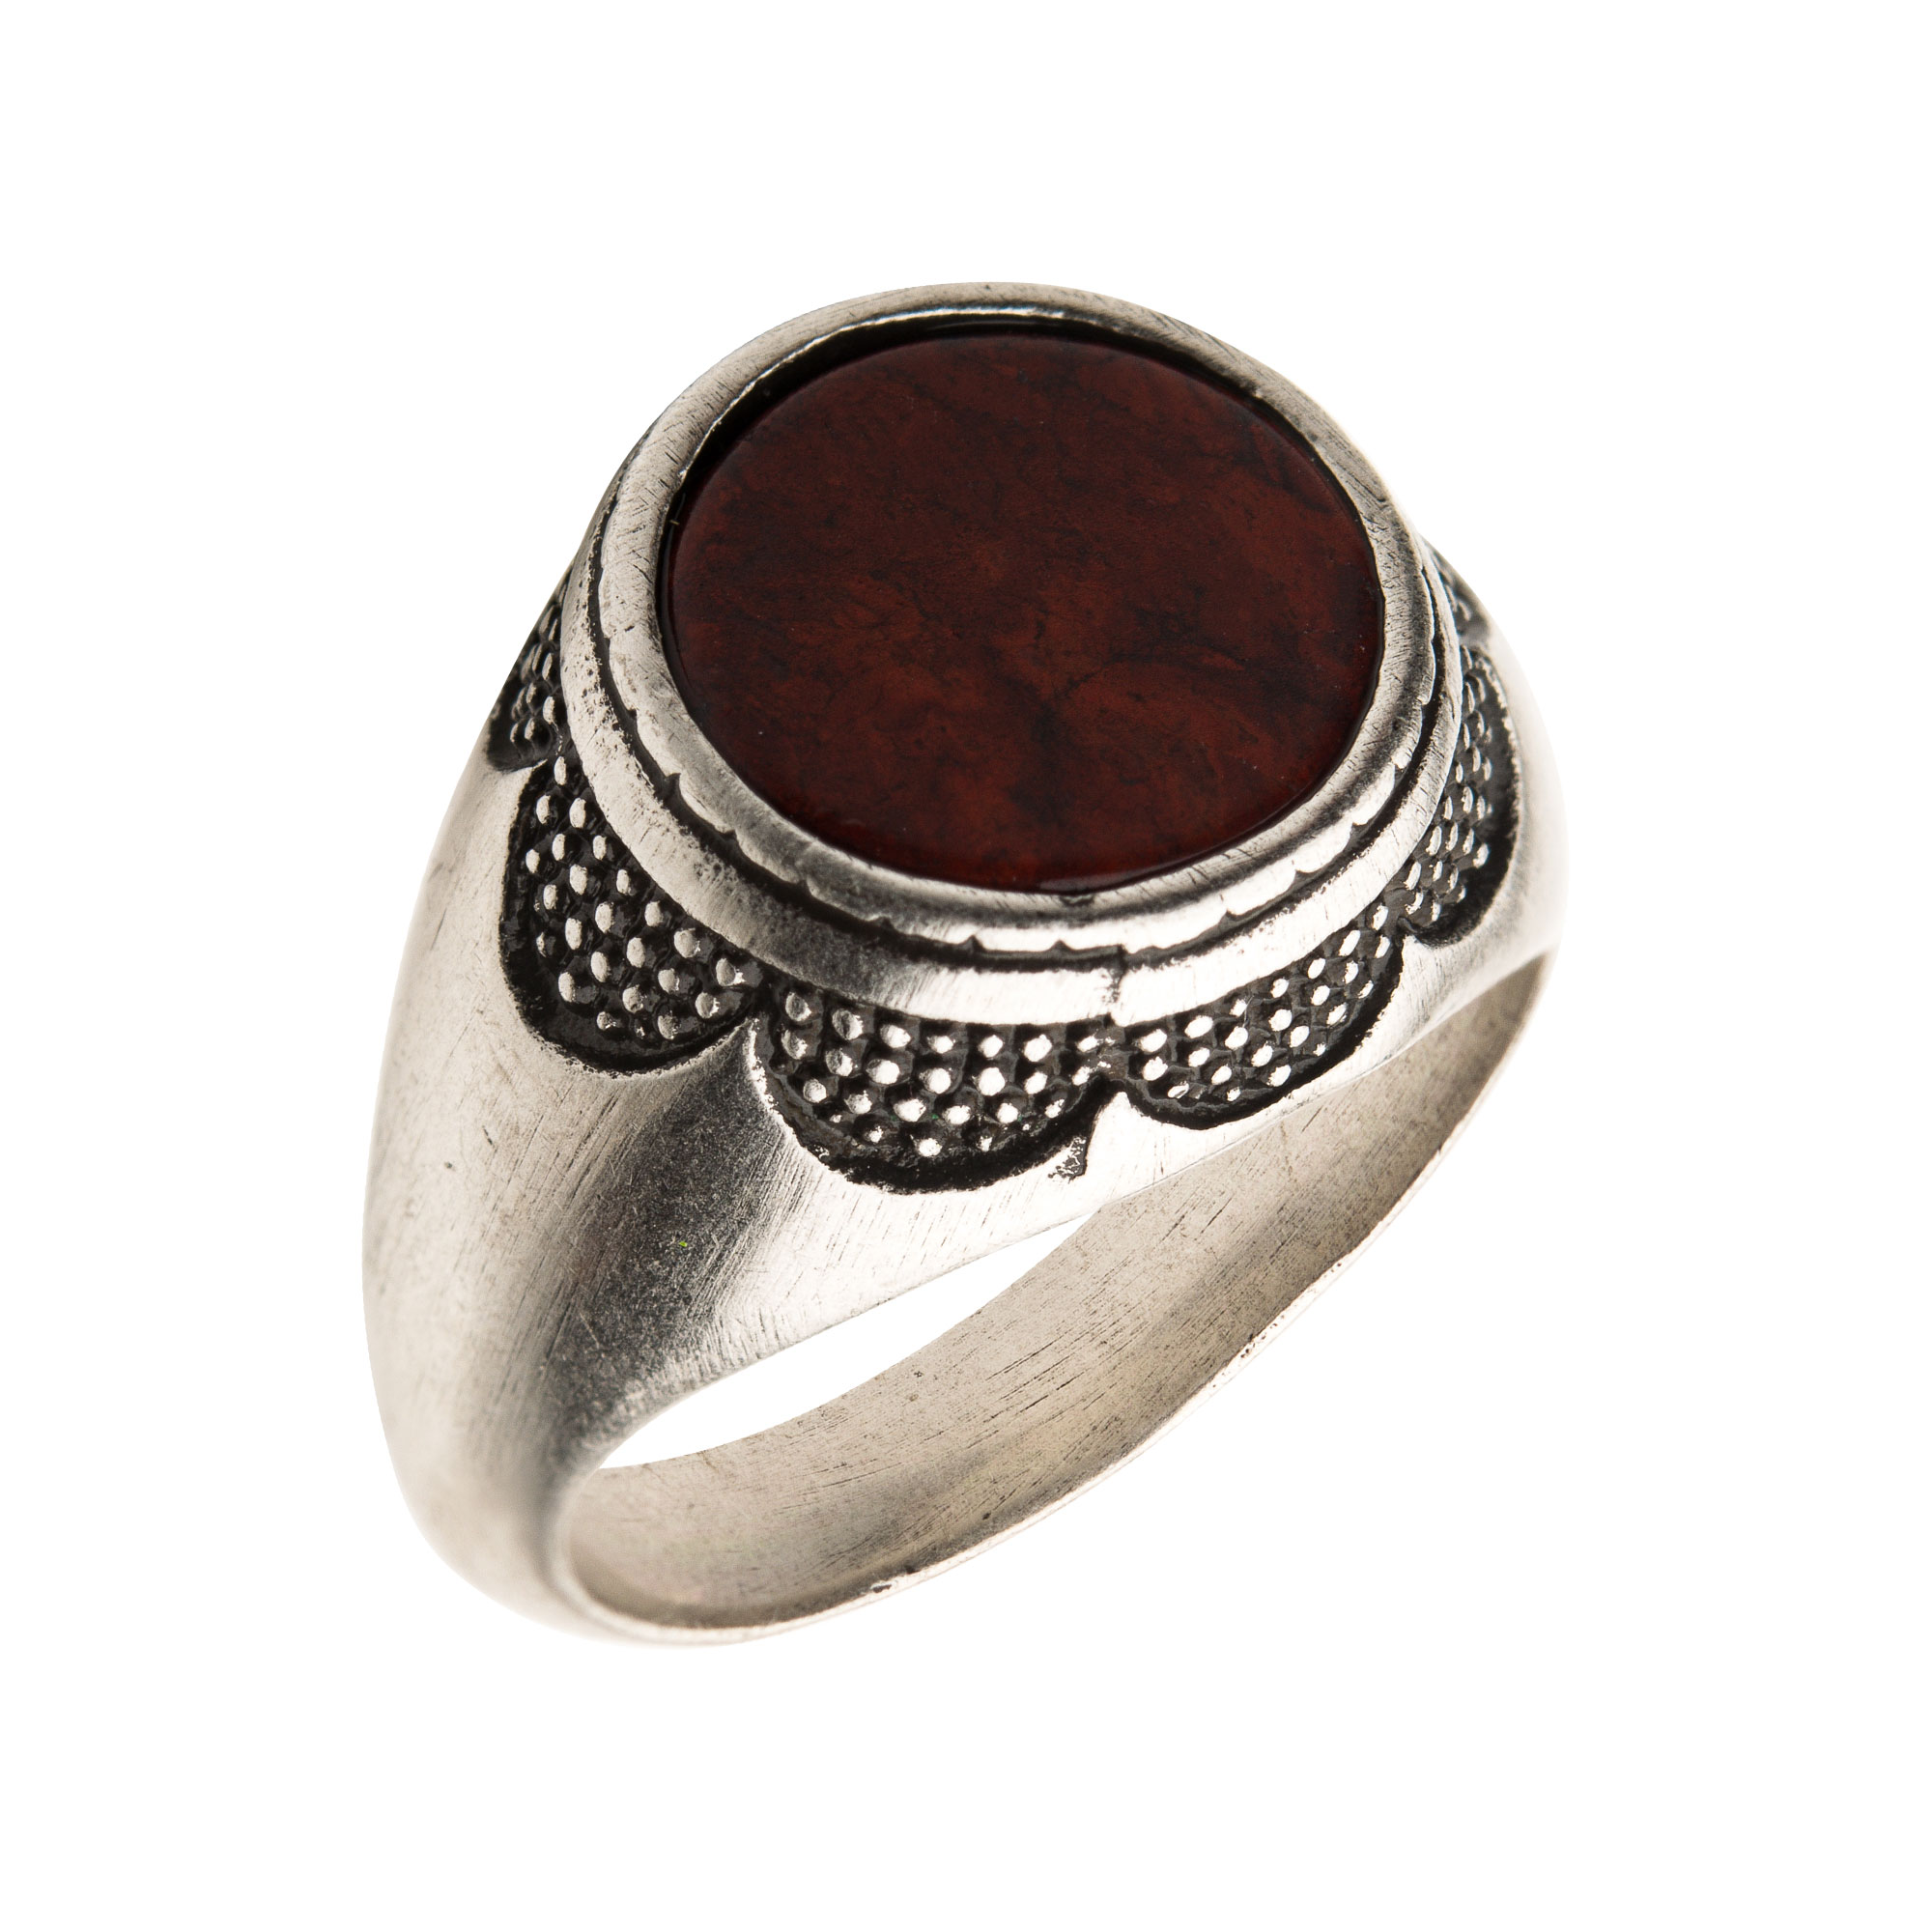 Stainless Steel Silver Plated with Red Jasper Stone Ring K. Martin Jeweler Dodge City, KS